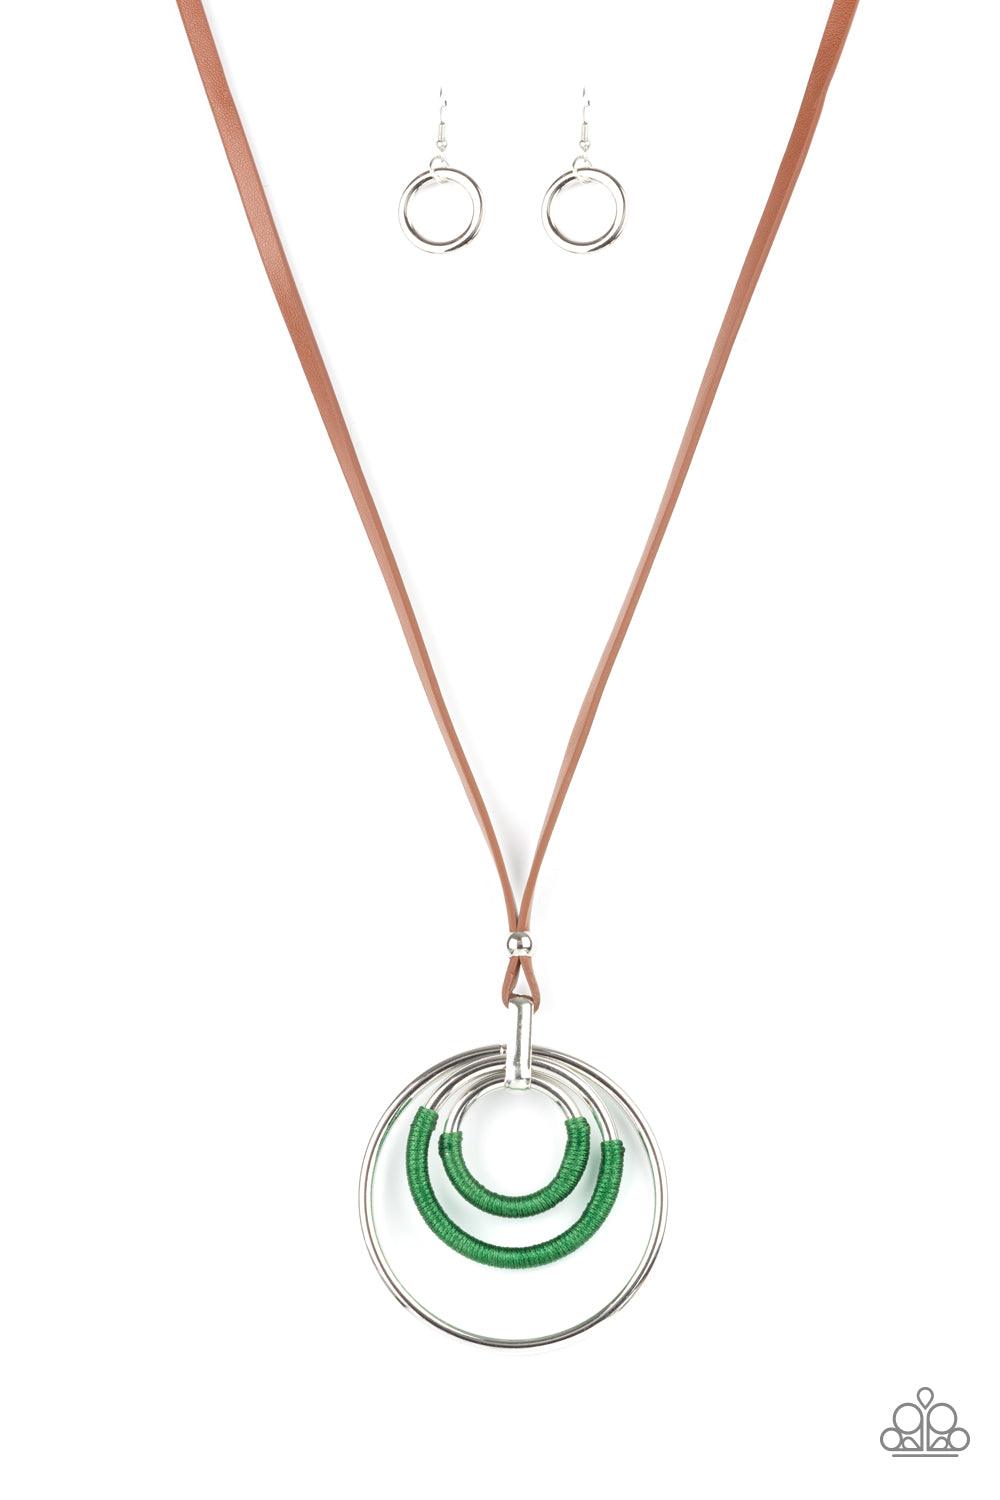 Paparazzi Accessories Hypnotic Happenings - Green An impressive set of thick silver hoops is held together in concentric fashion by a strong silver fitting. Boldly wrapped bright green thread accents two hoops as the hefty pendant suspends from a lengthen